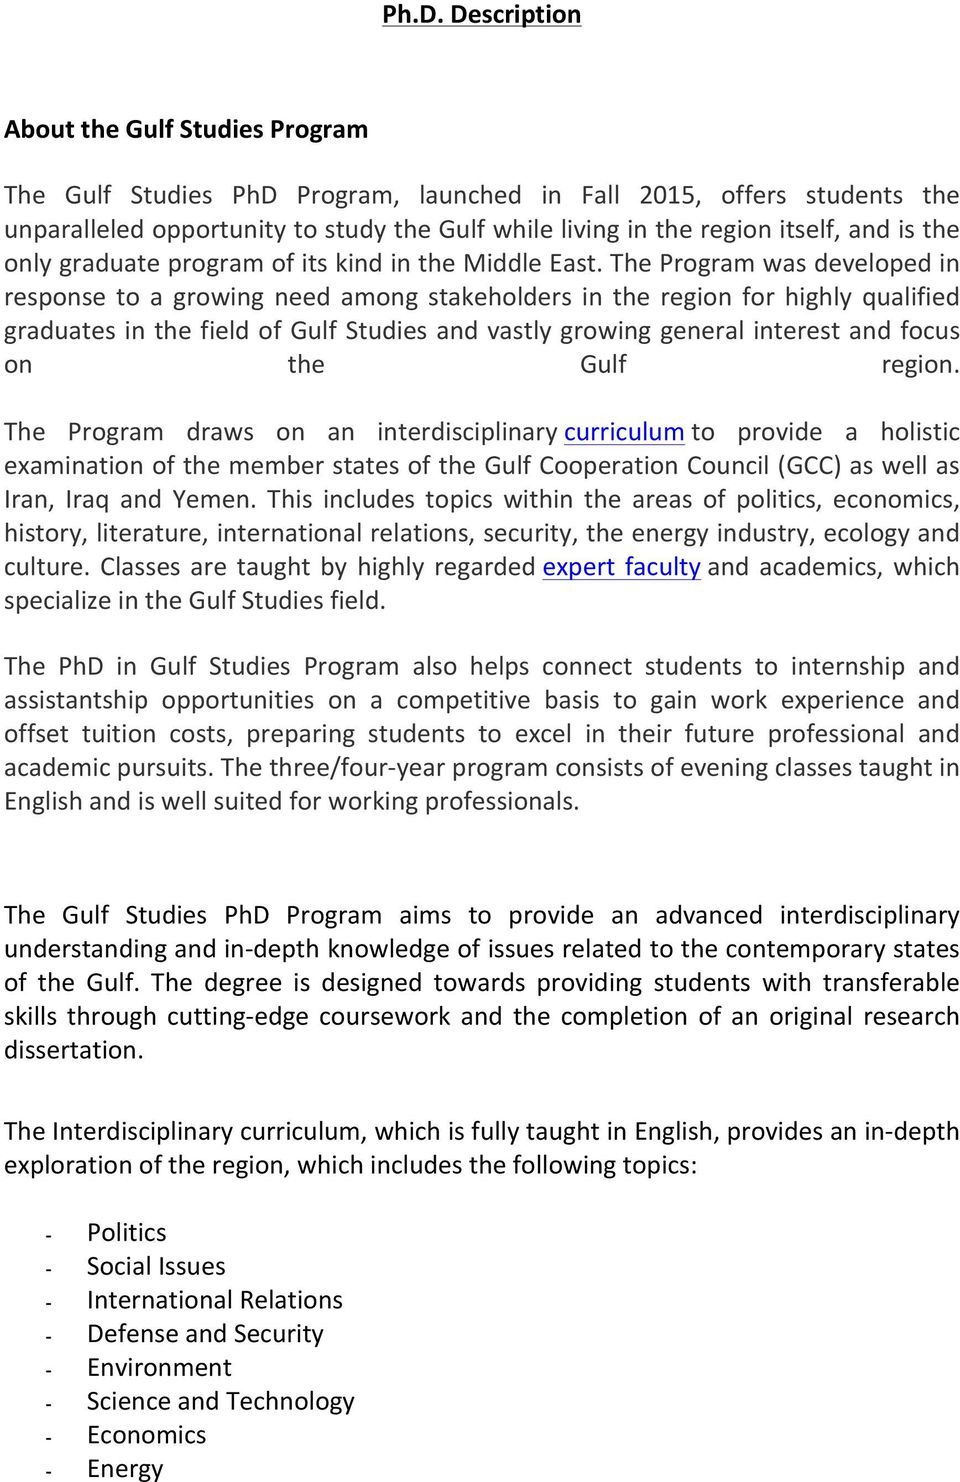 The Program was developed in response to a growing need among stakeholders in the region for highly qualified graduates in the field of Gulf Studies and vastly growing general interest and focus on